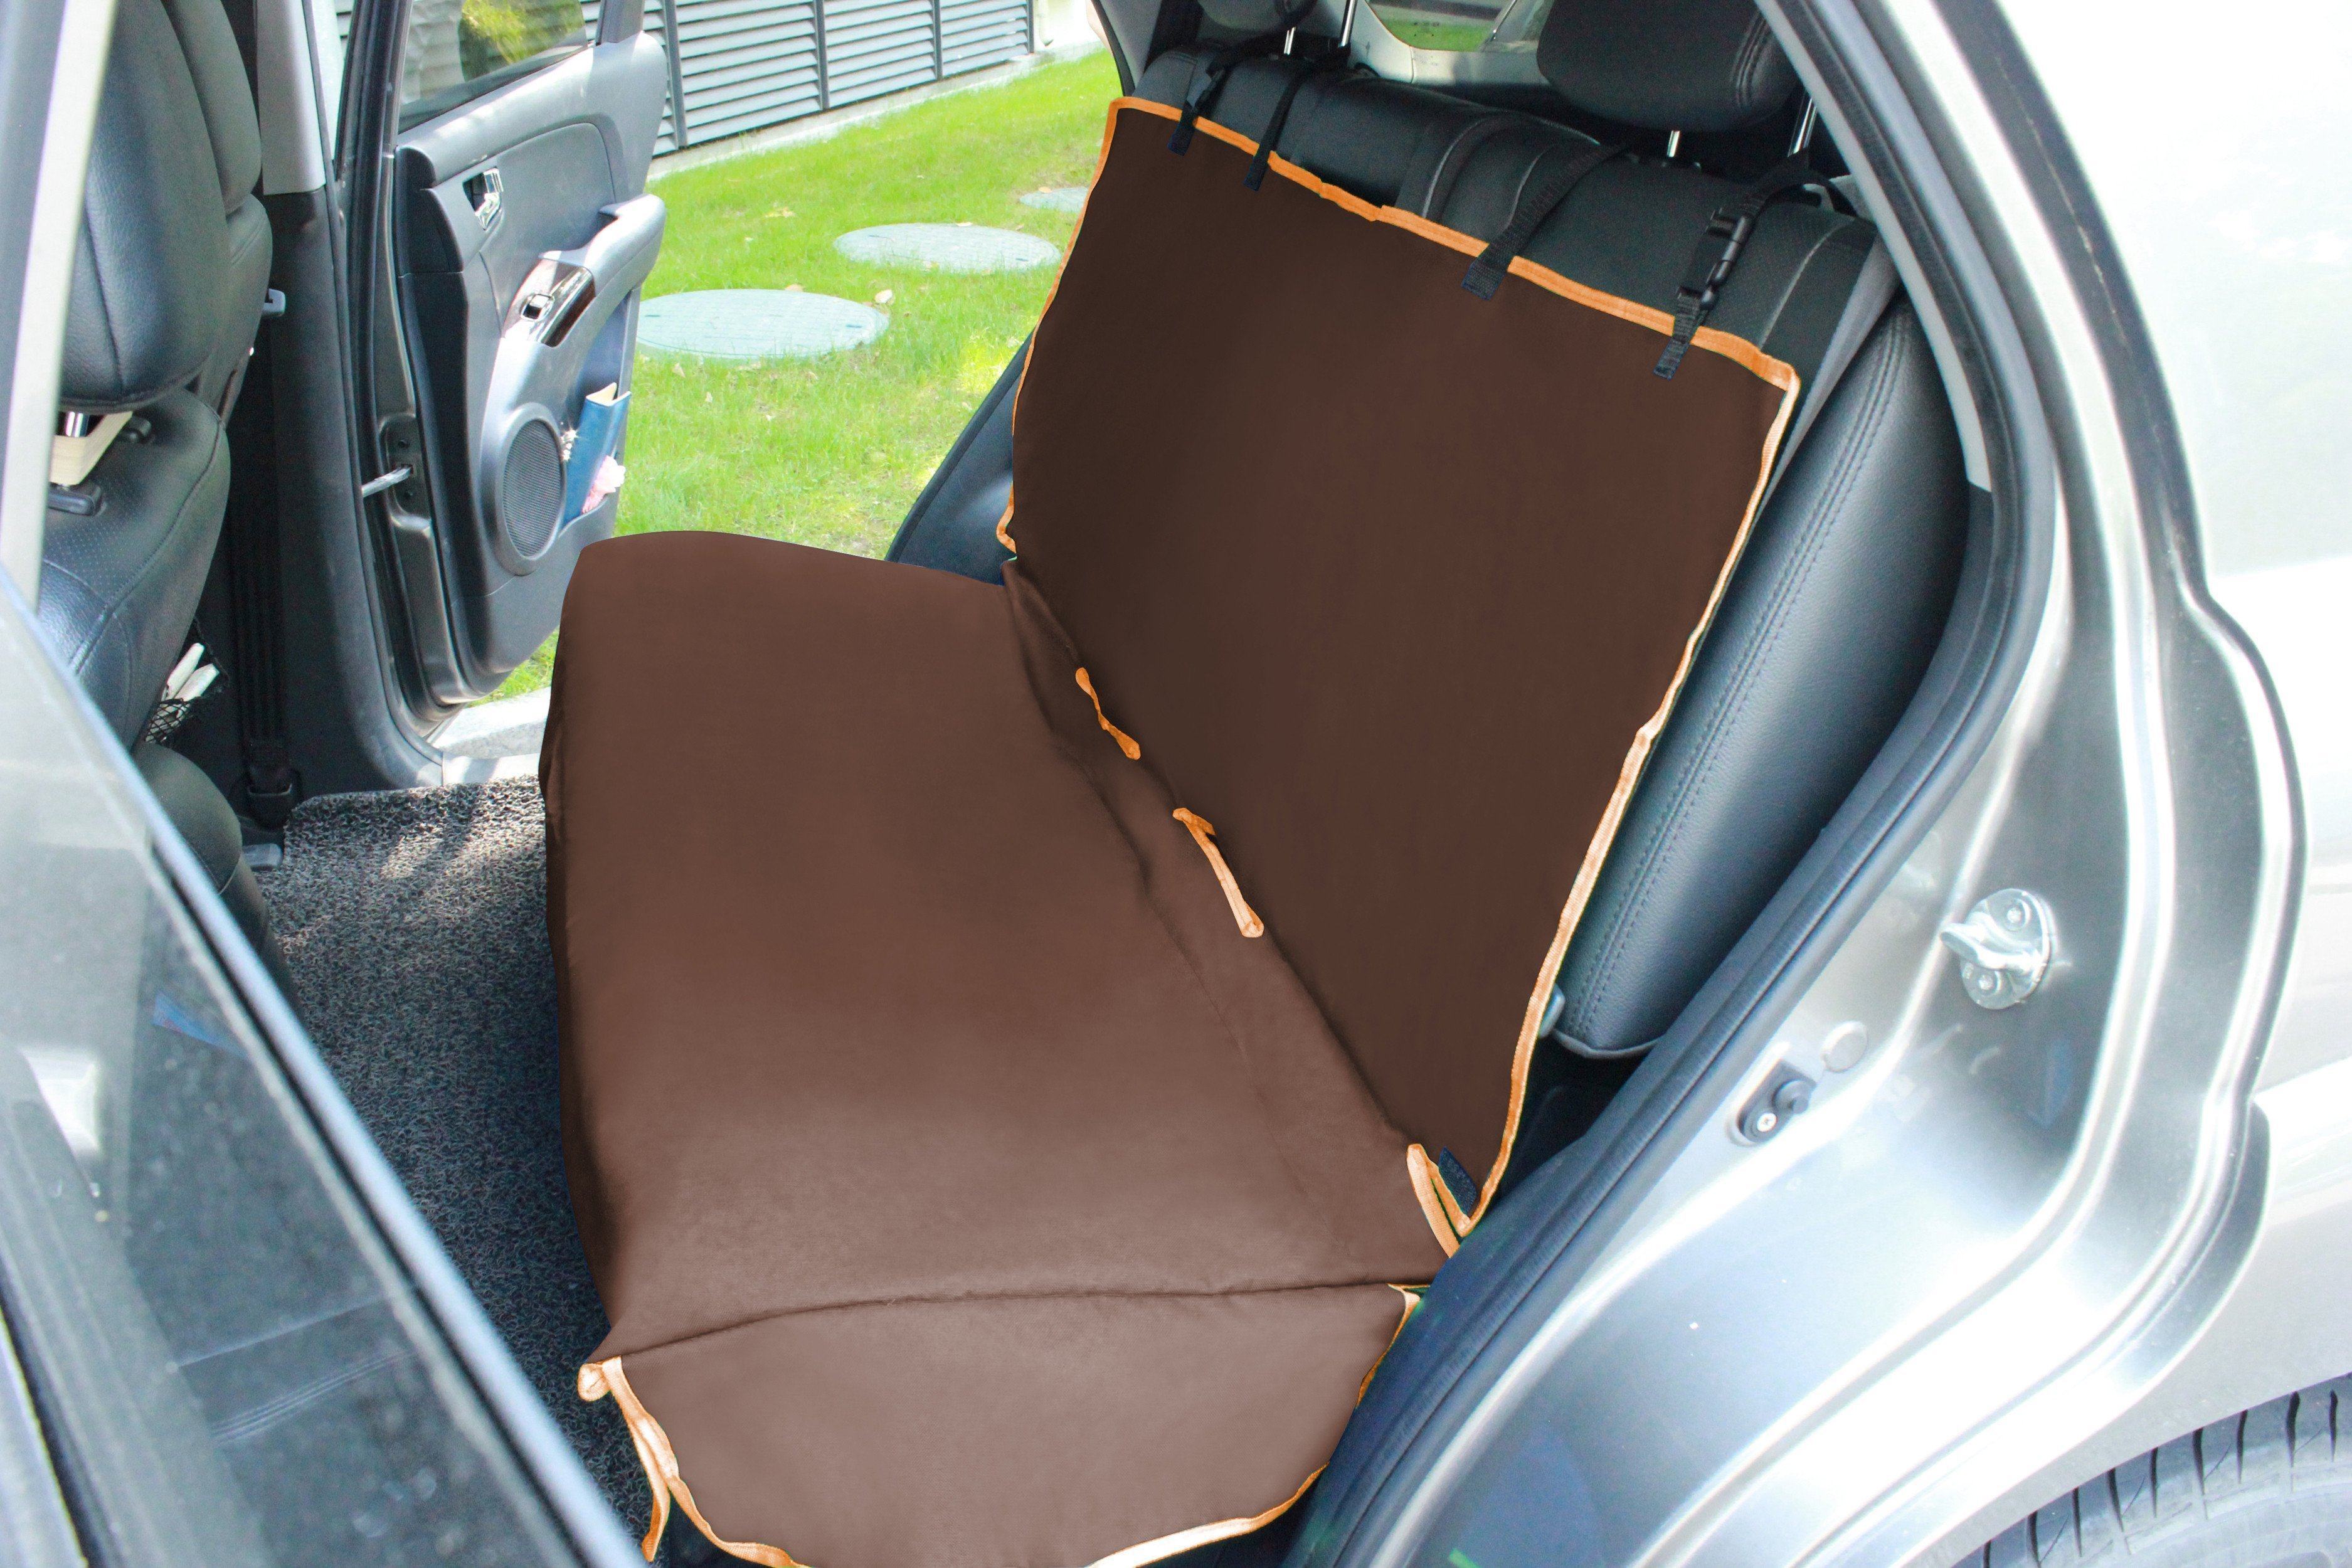 Pet Life ® 'Open Road' Full Back Seat Safety Child Pet Cat Dog Car Seat Carseat Cover Protector Dark Brown 